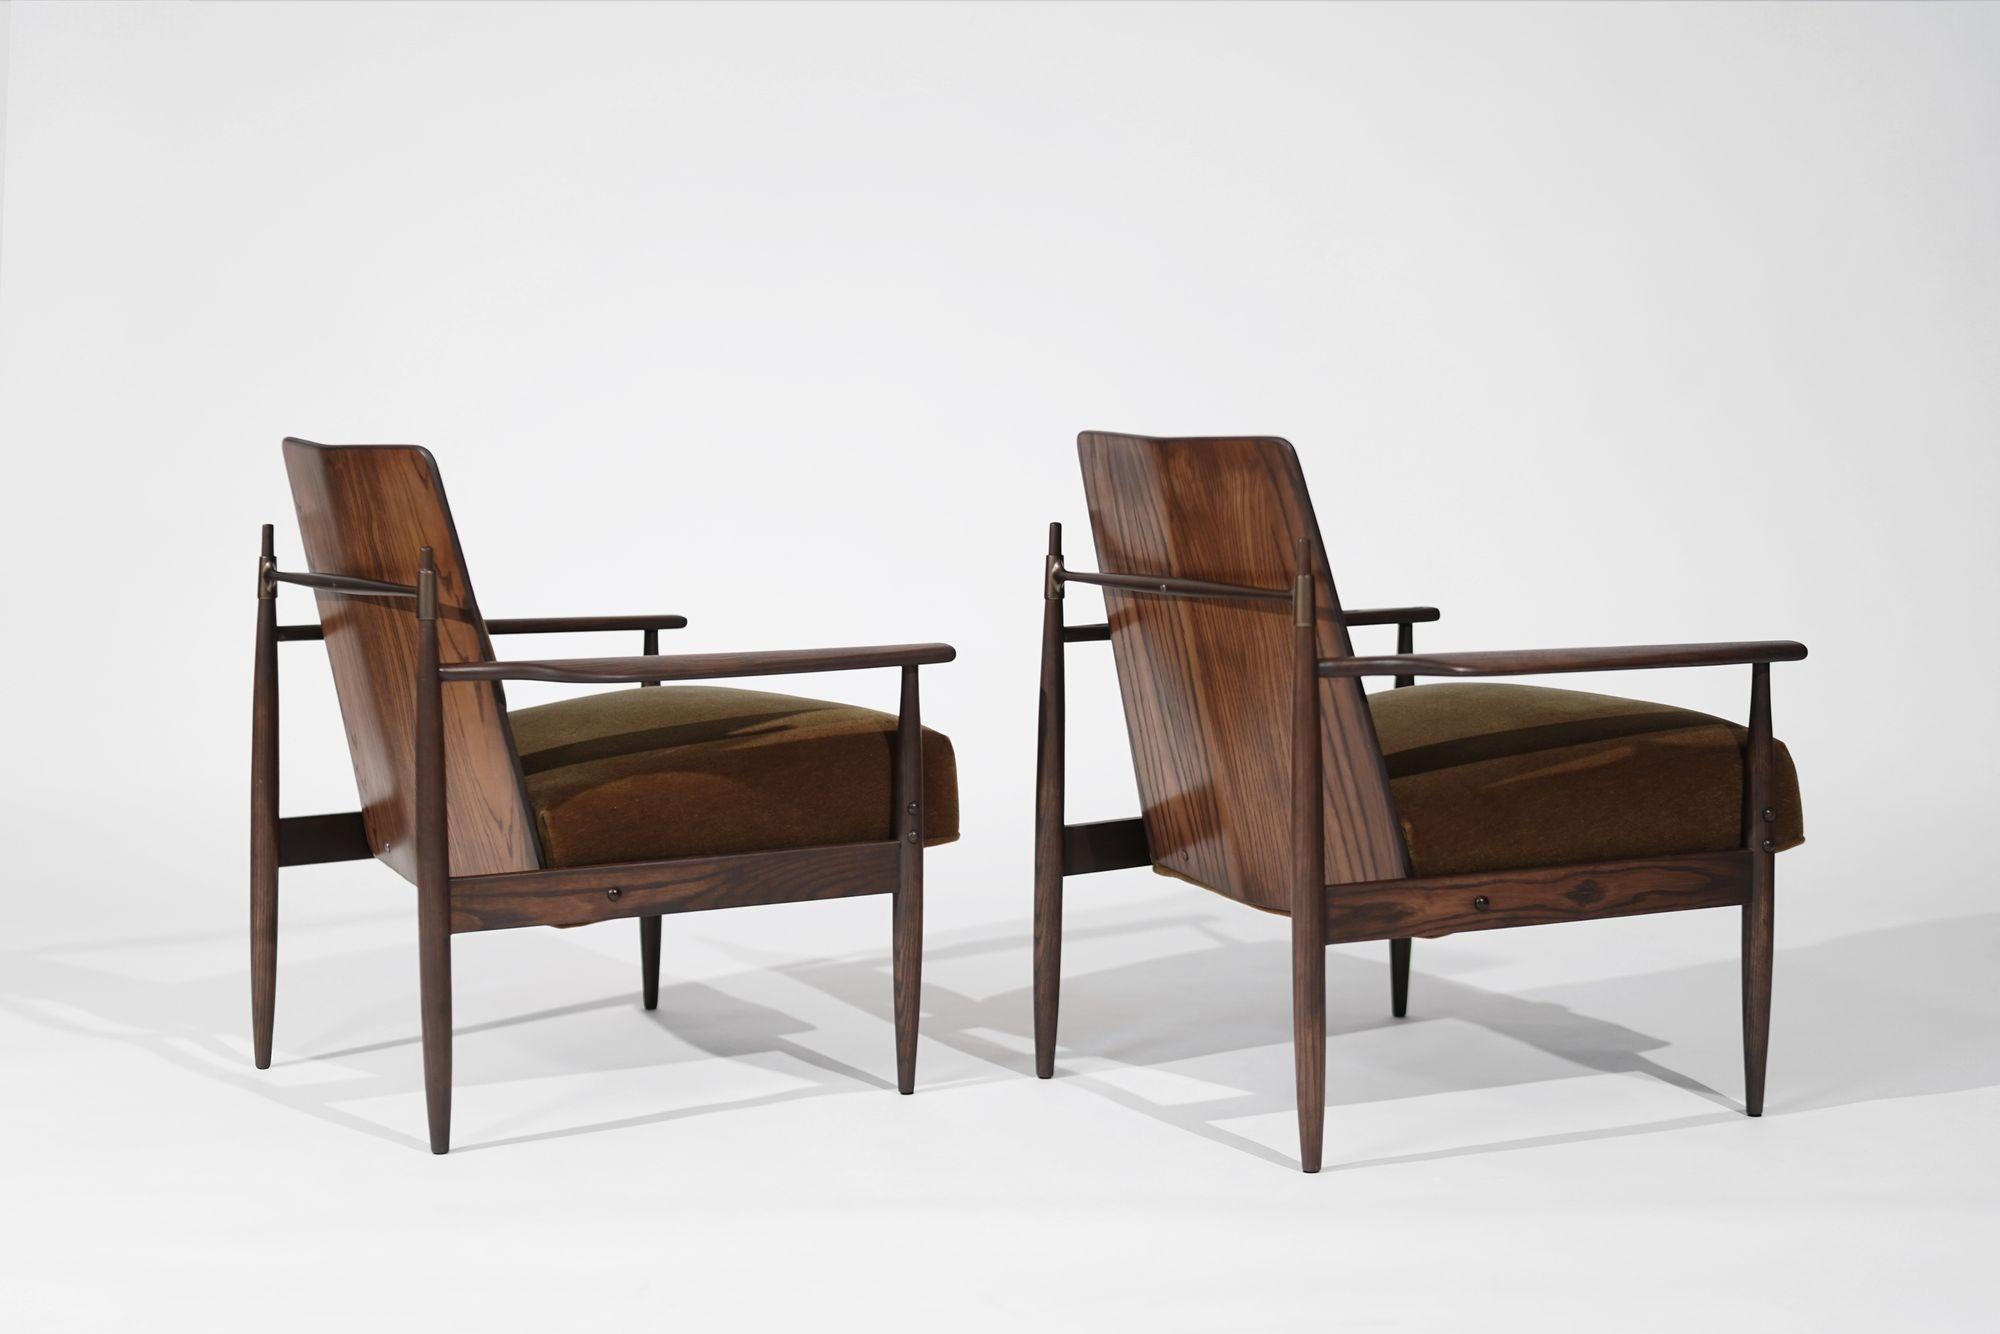 20th Century Set of Oak, Mohair and Bronze Lounge Chairs by Dan Johnson, C. 1950s For Sale